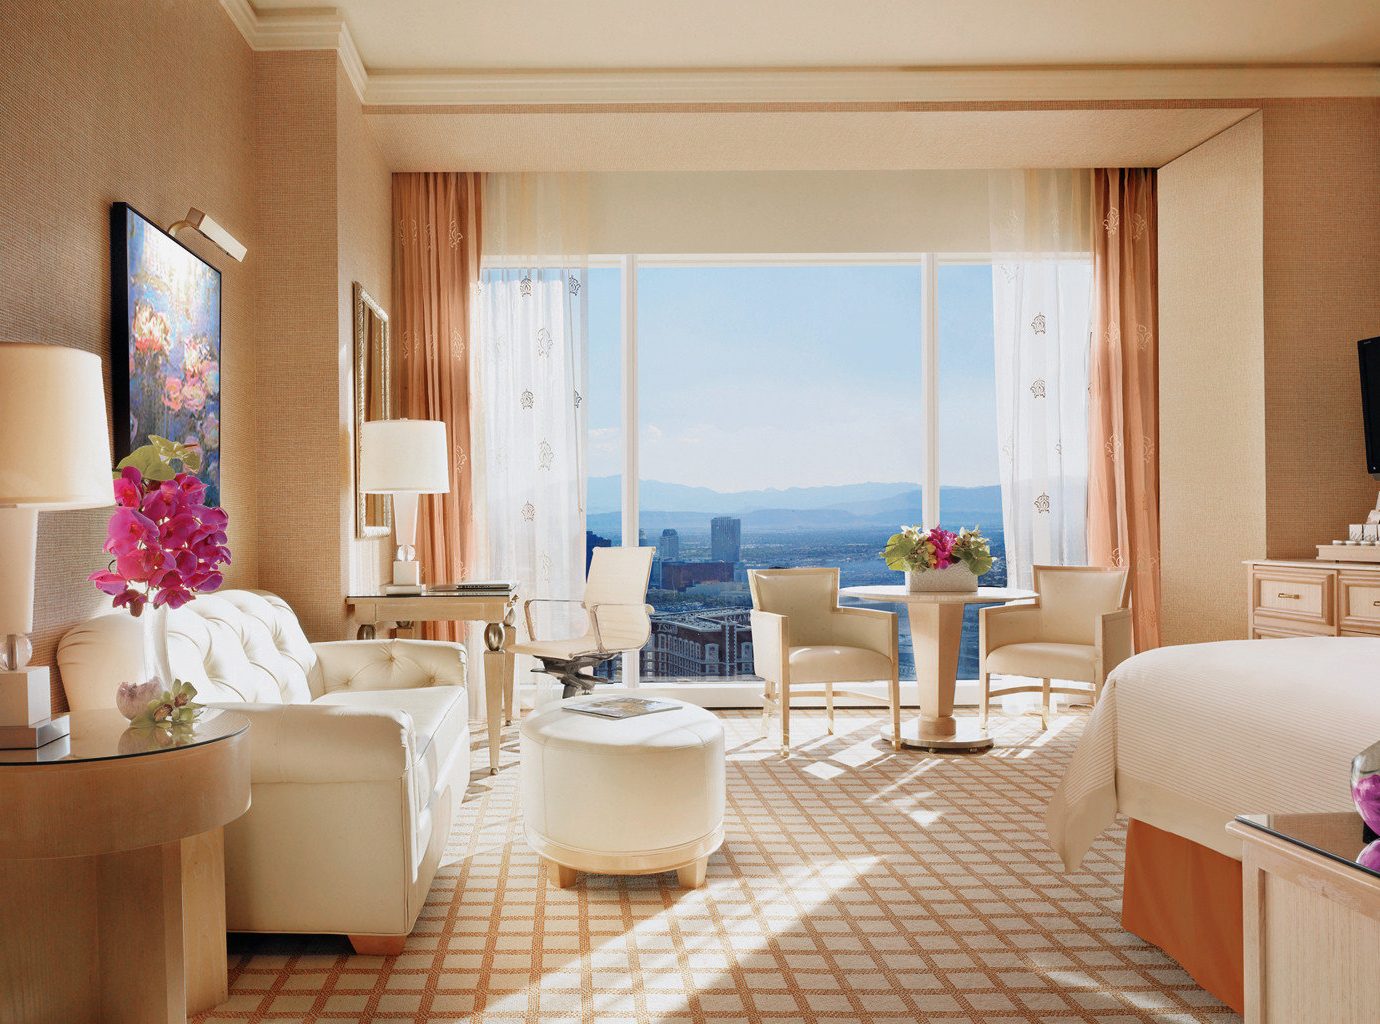 The 10 BEST Las Vegas Hotels for 2020 Are Sure Bets | Jetsetter